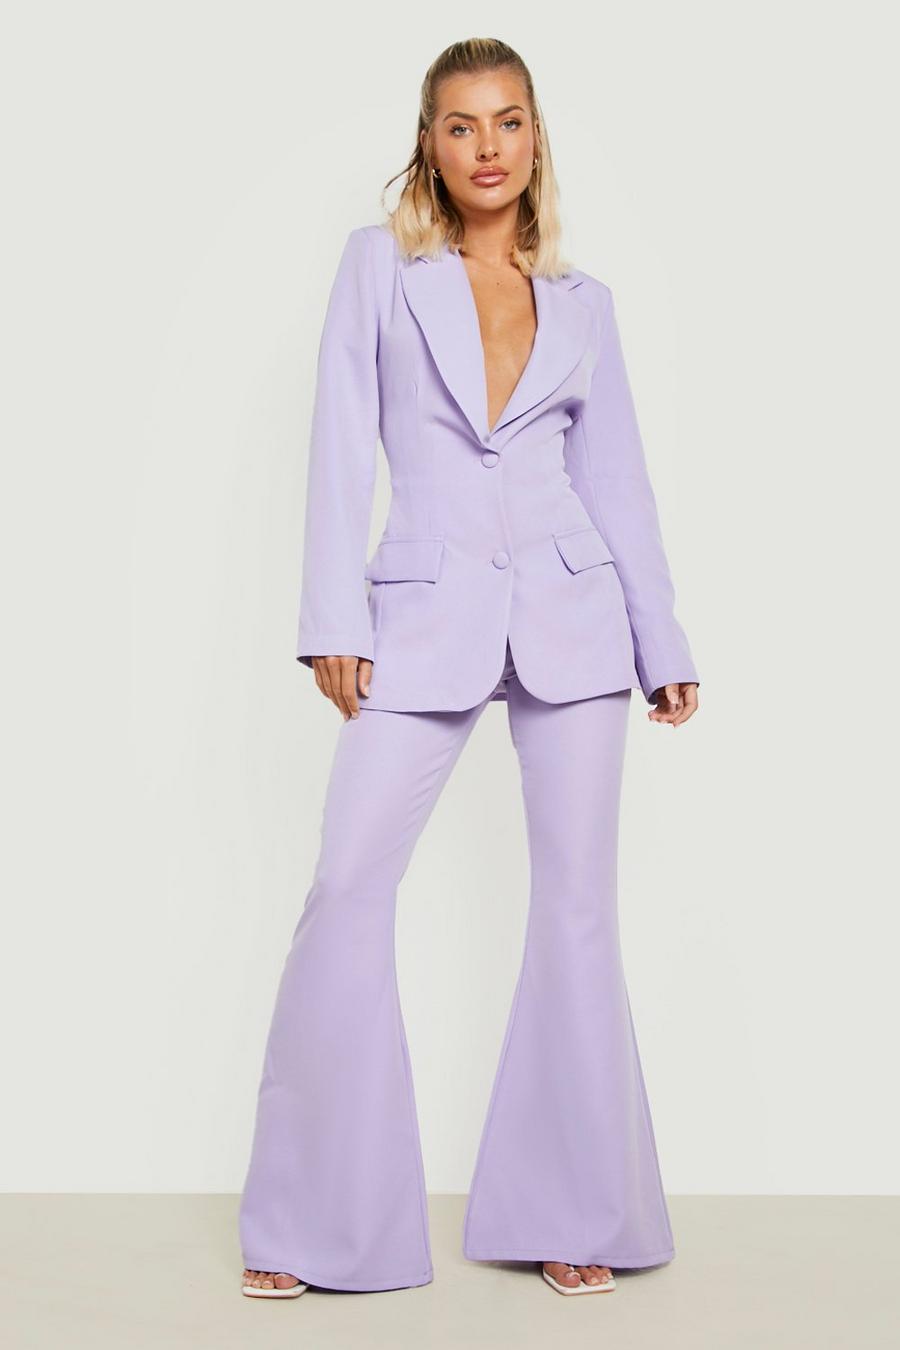 Lilac purple Lace Up Back Tailored Fitted Blazer